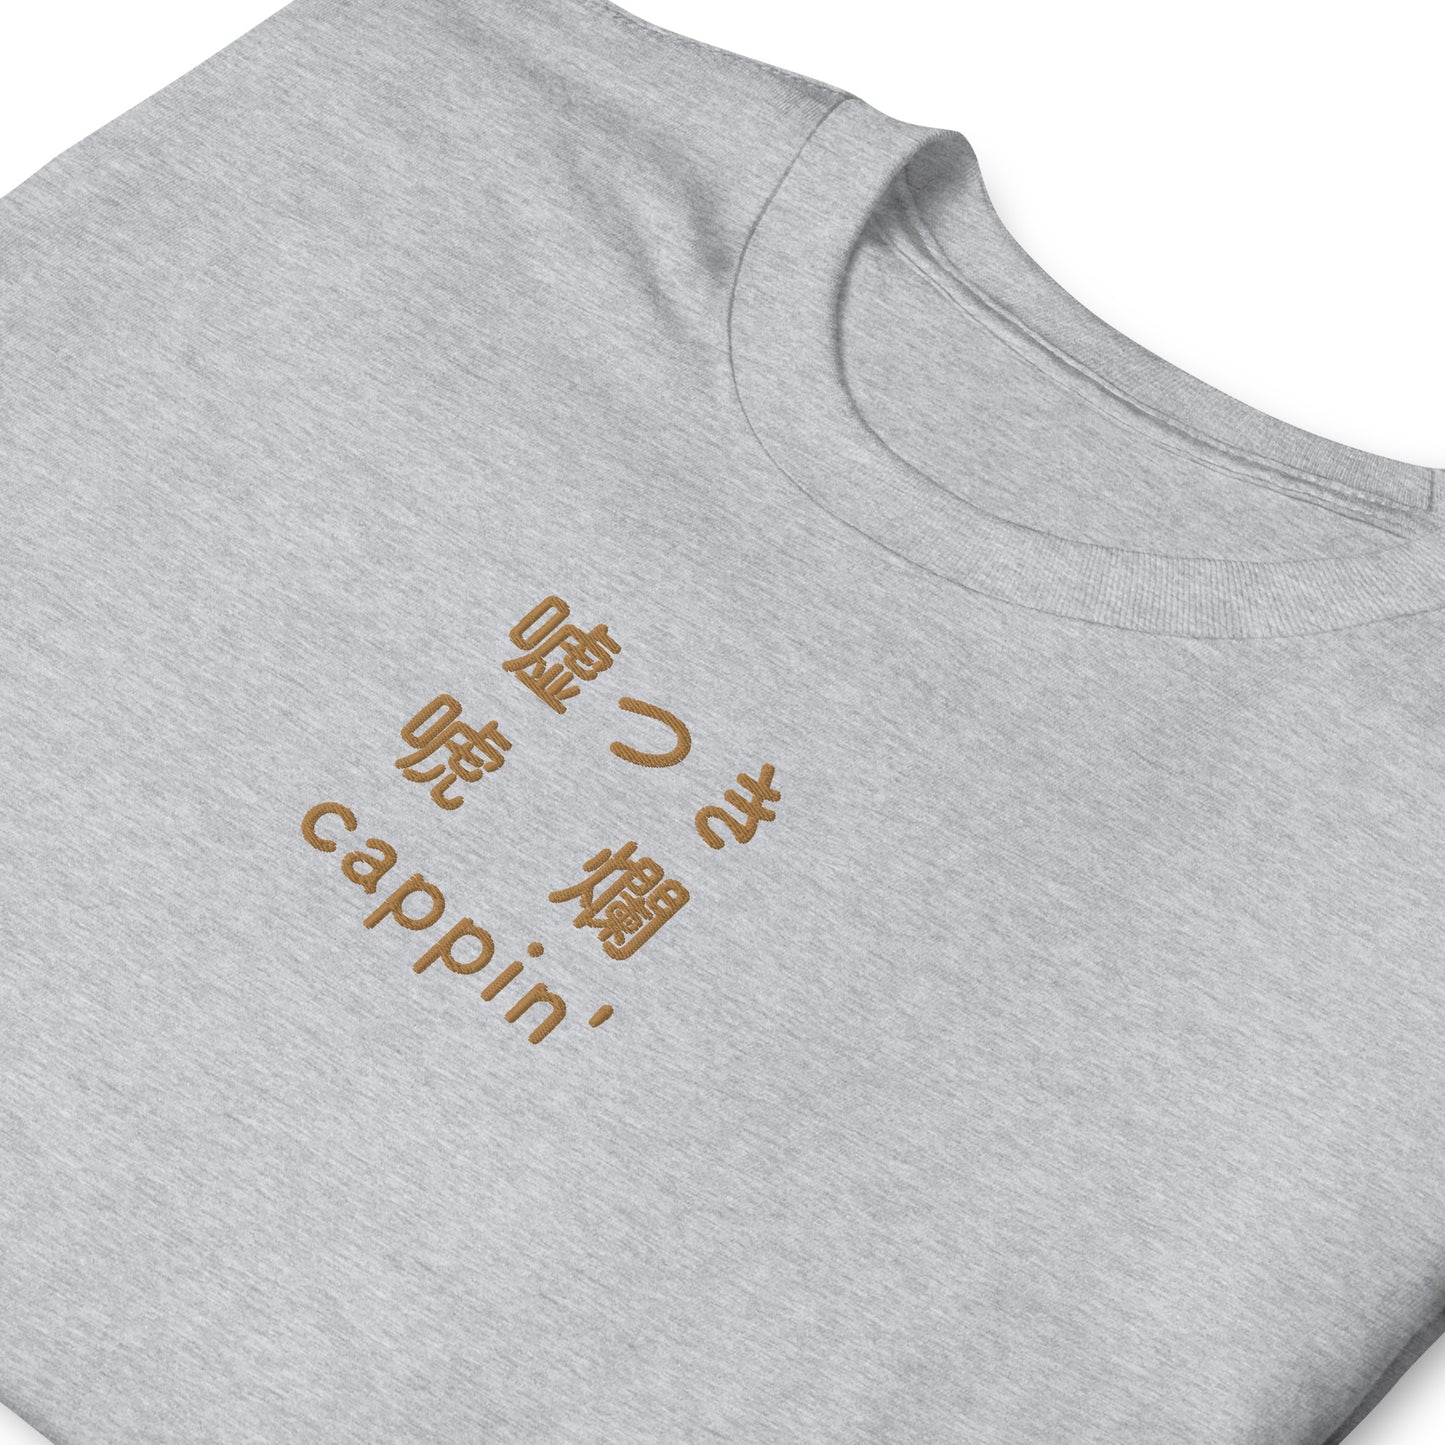 Light Gray High Quality Tee - Front Design with an Brown Embroidery "Cappin'" in Japanese,Chinese and English